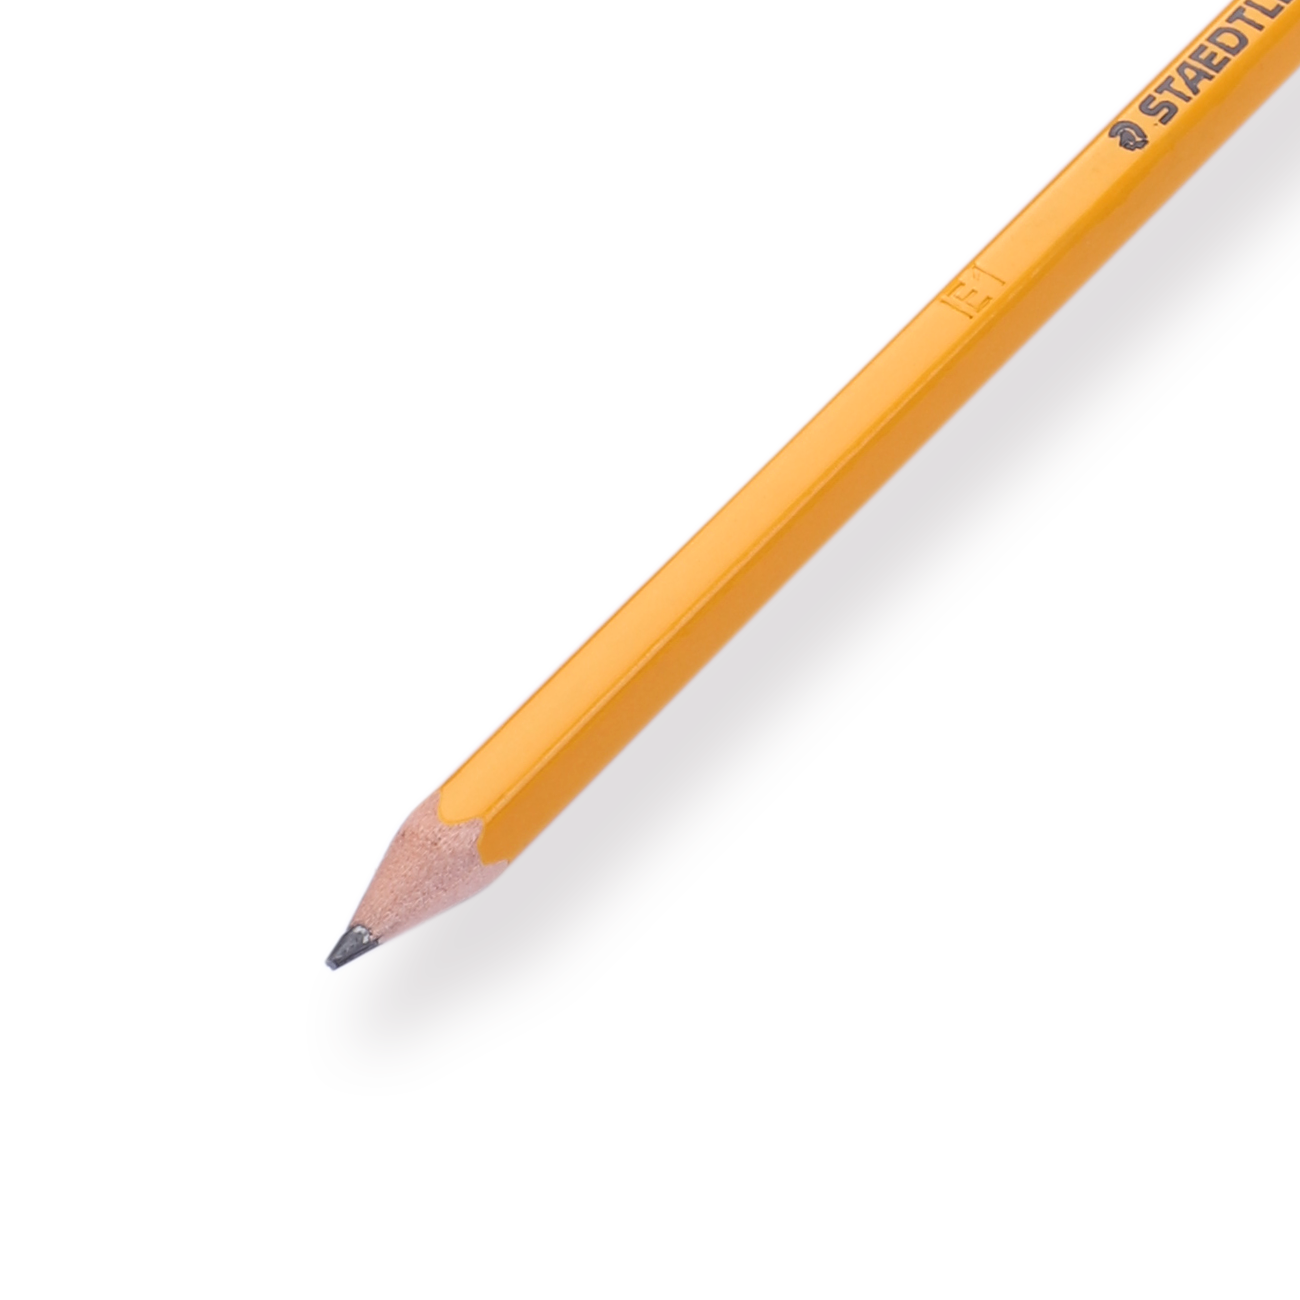 Staedtler Yellow Pencil Sets